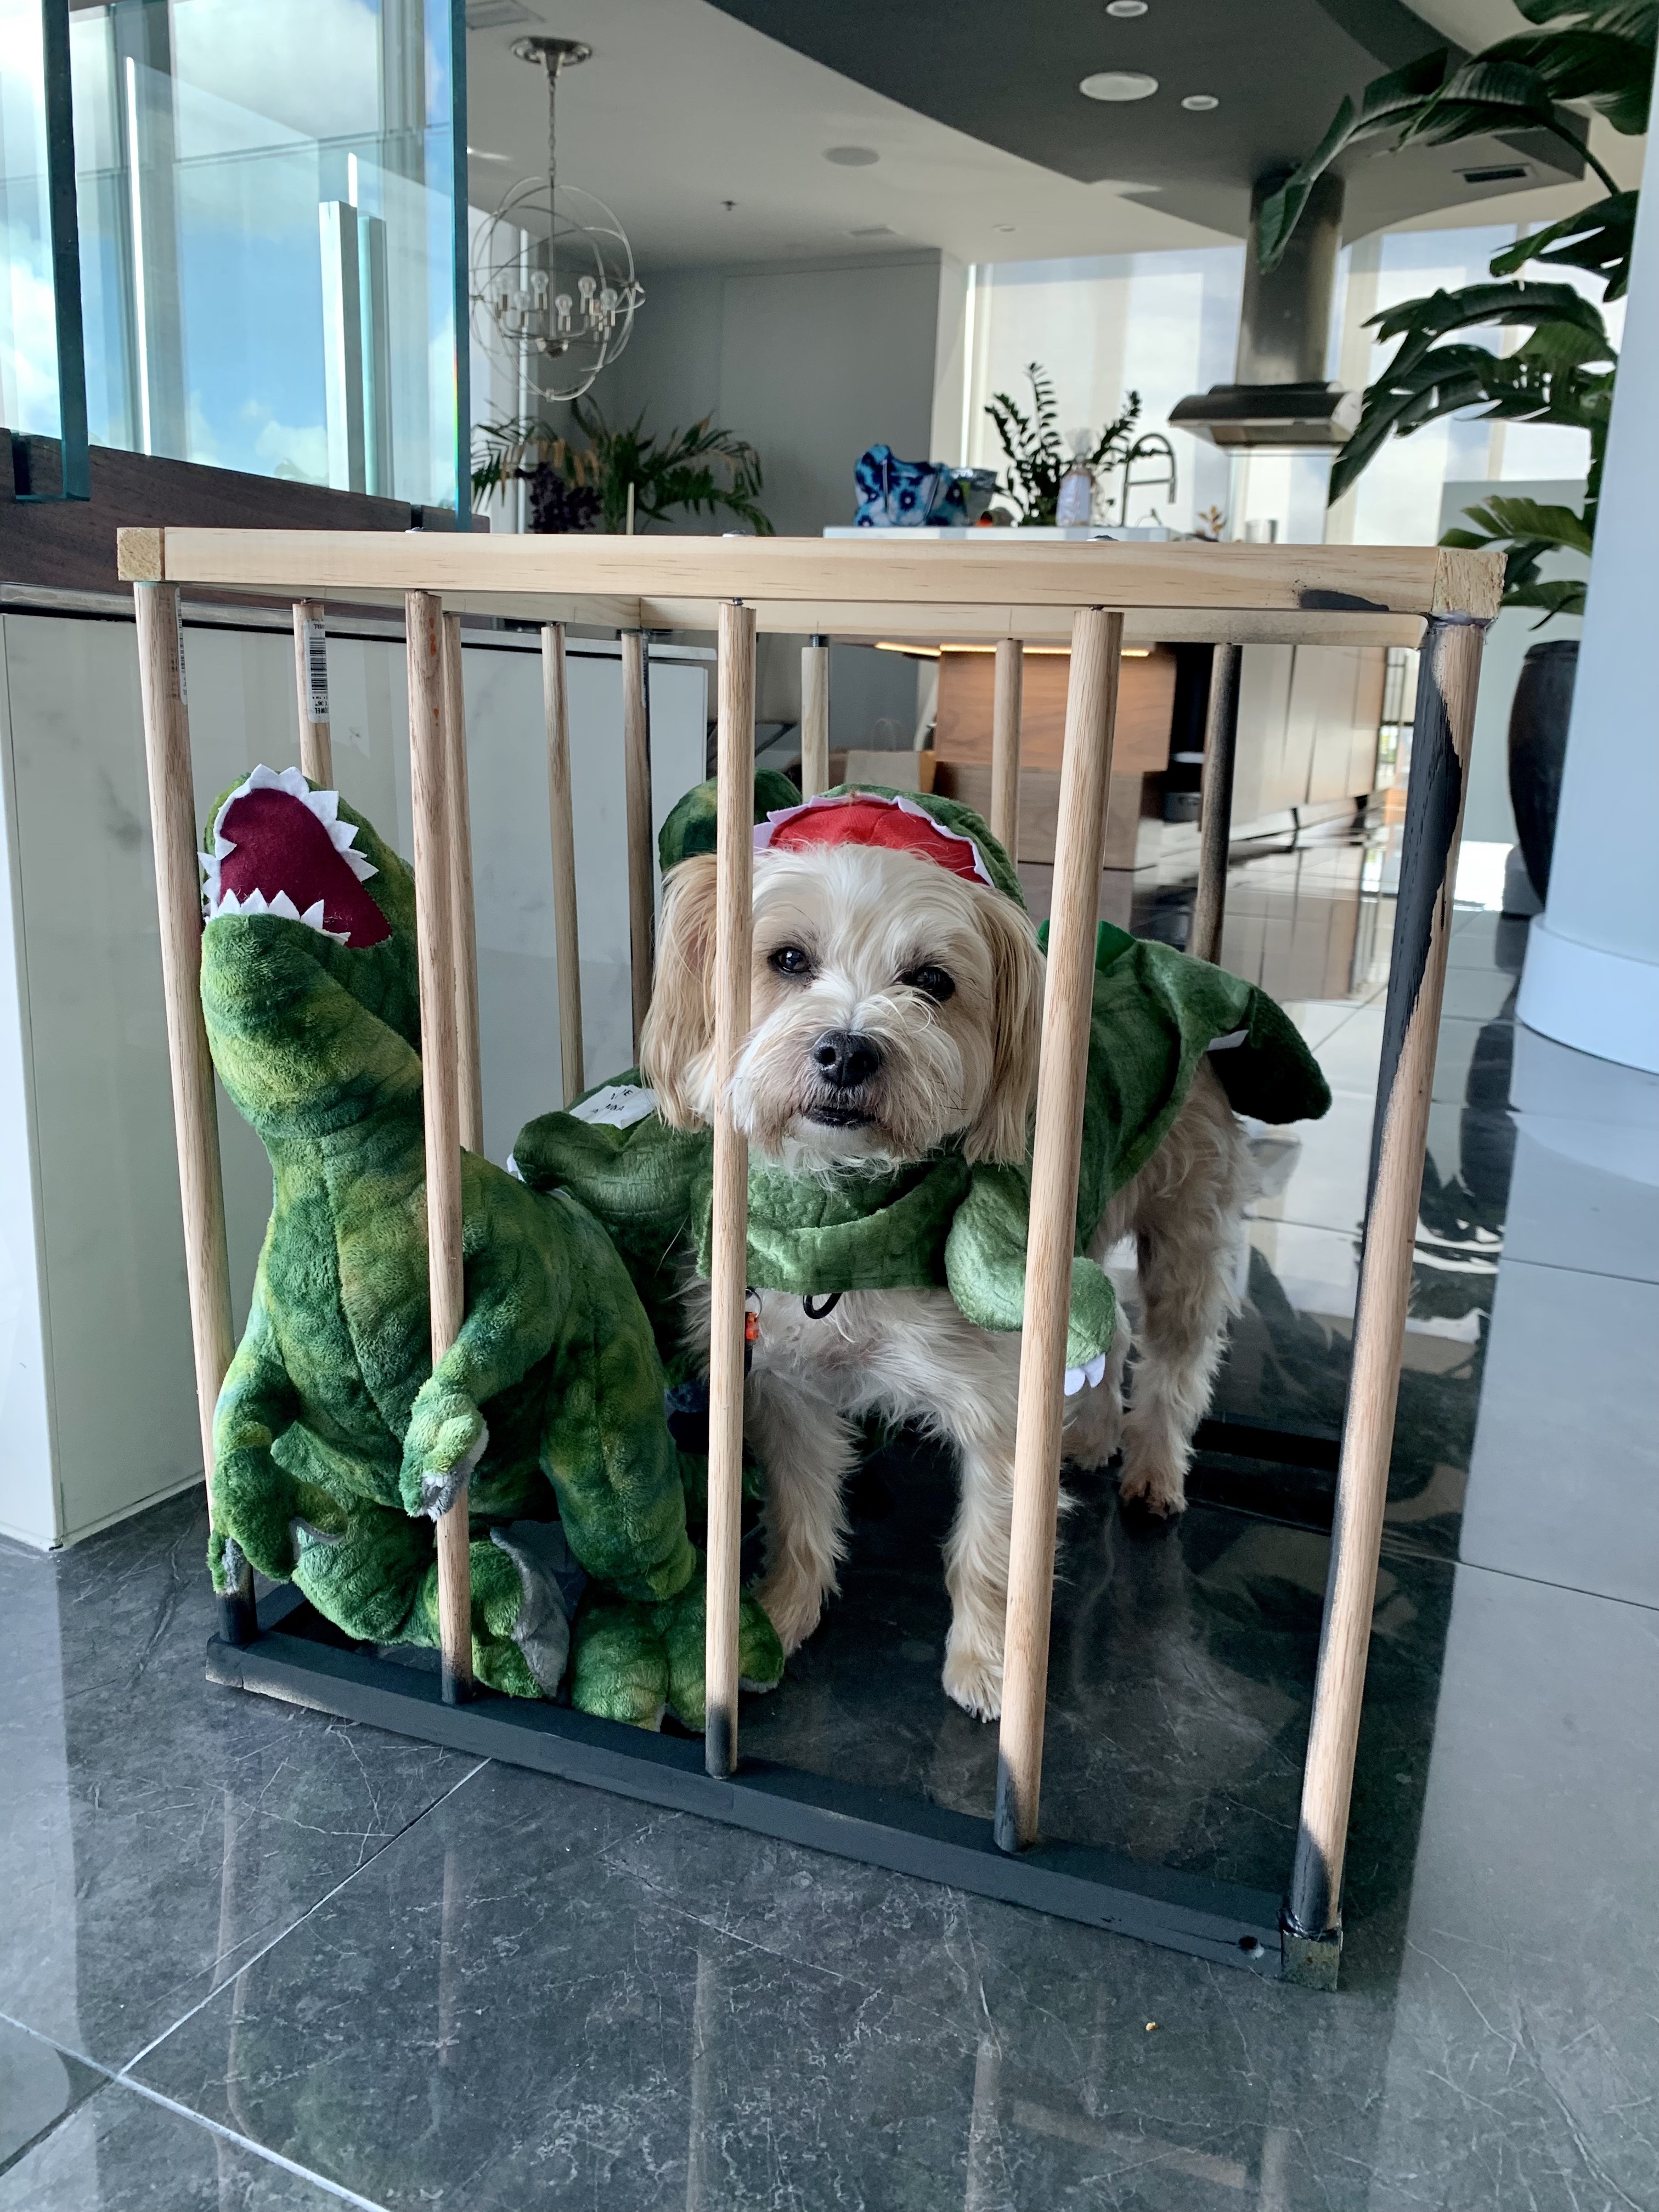 Easy Halloween Couples Costume Idea With Your Dog: Jurassic Park 